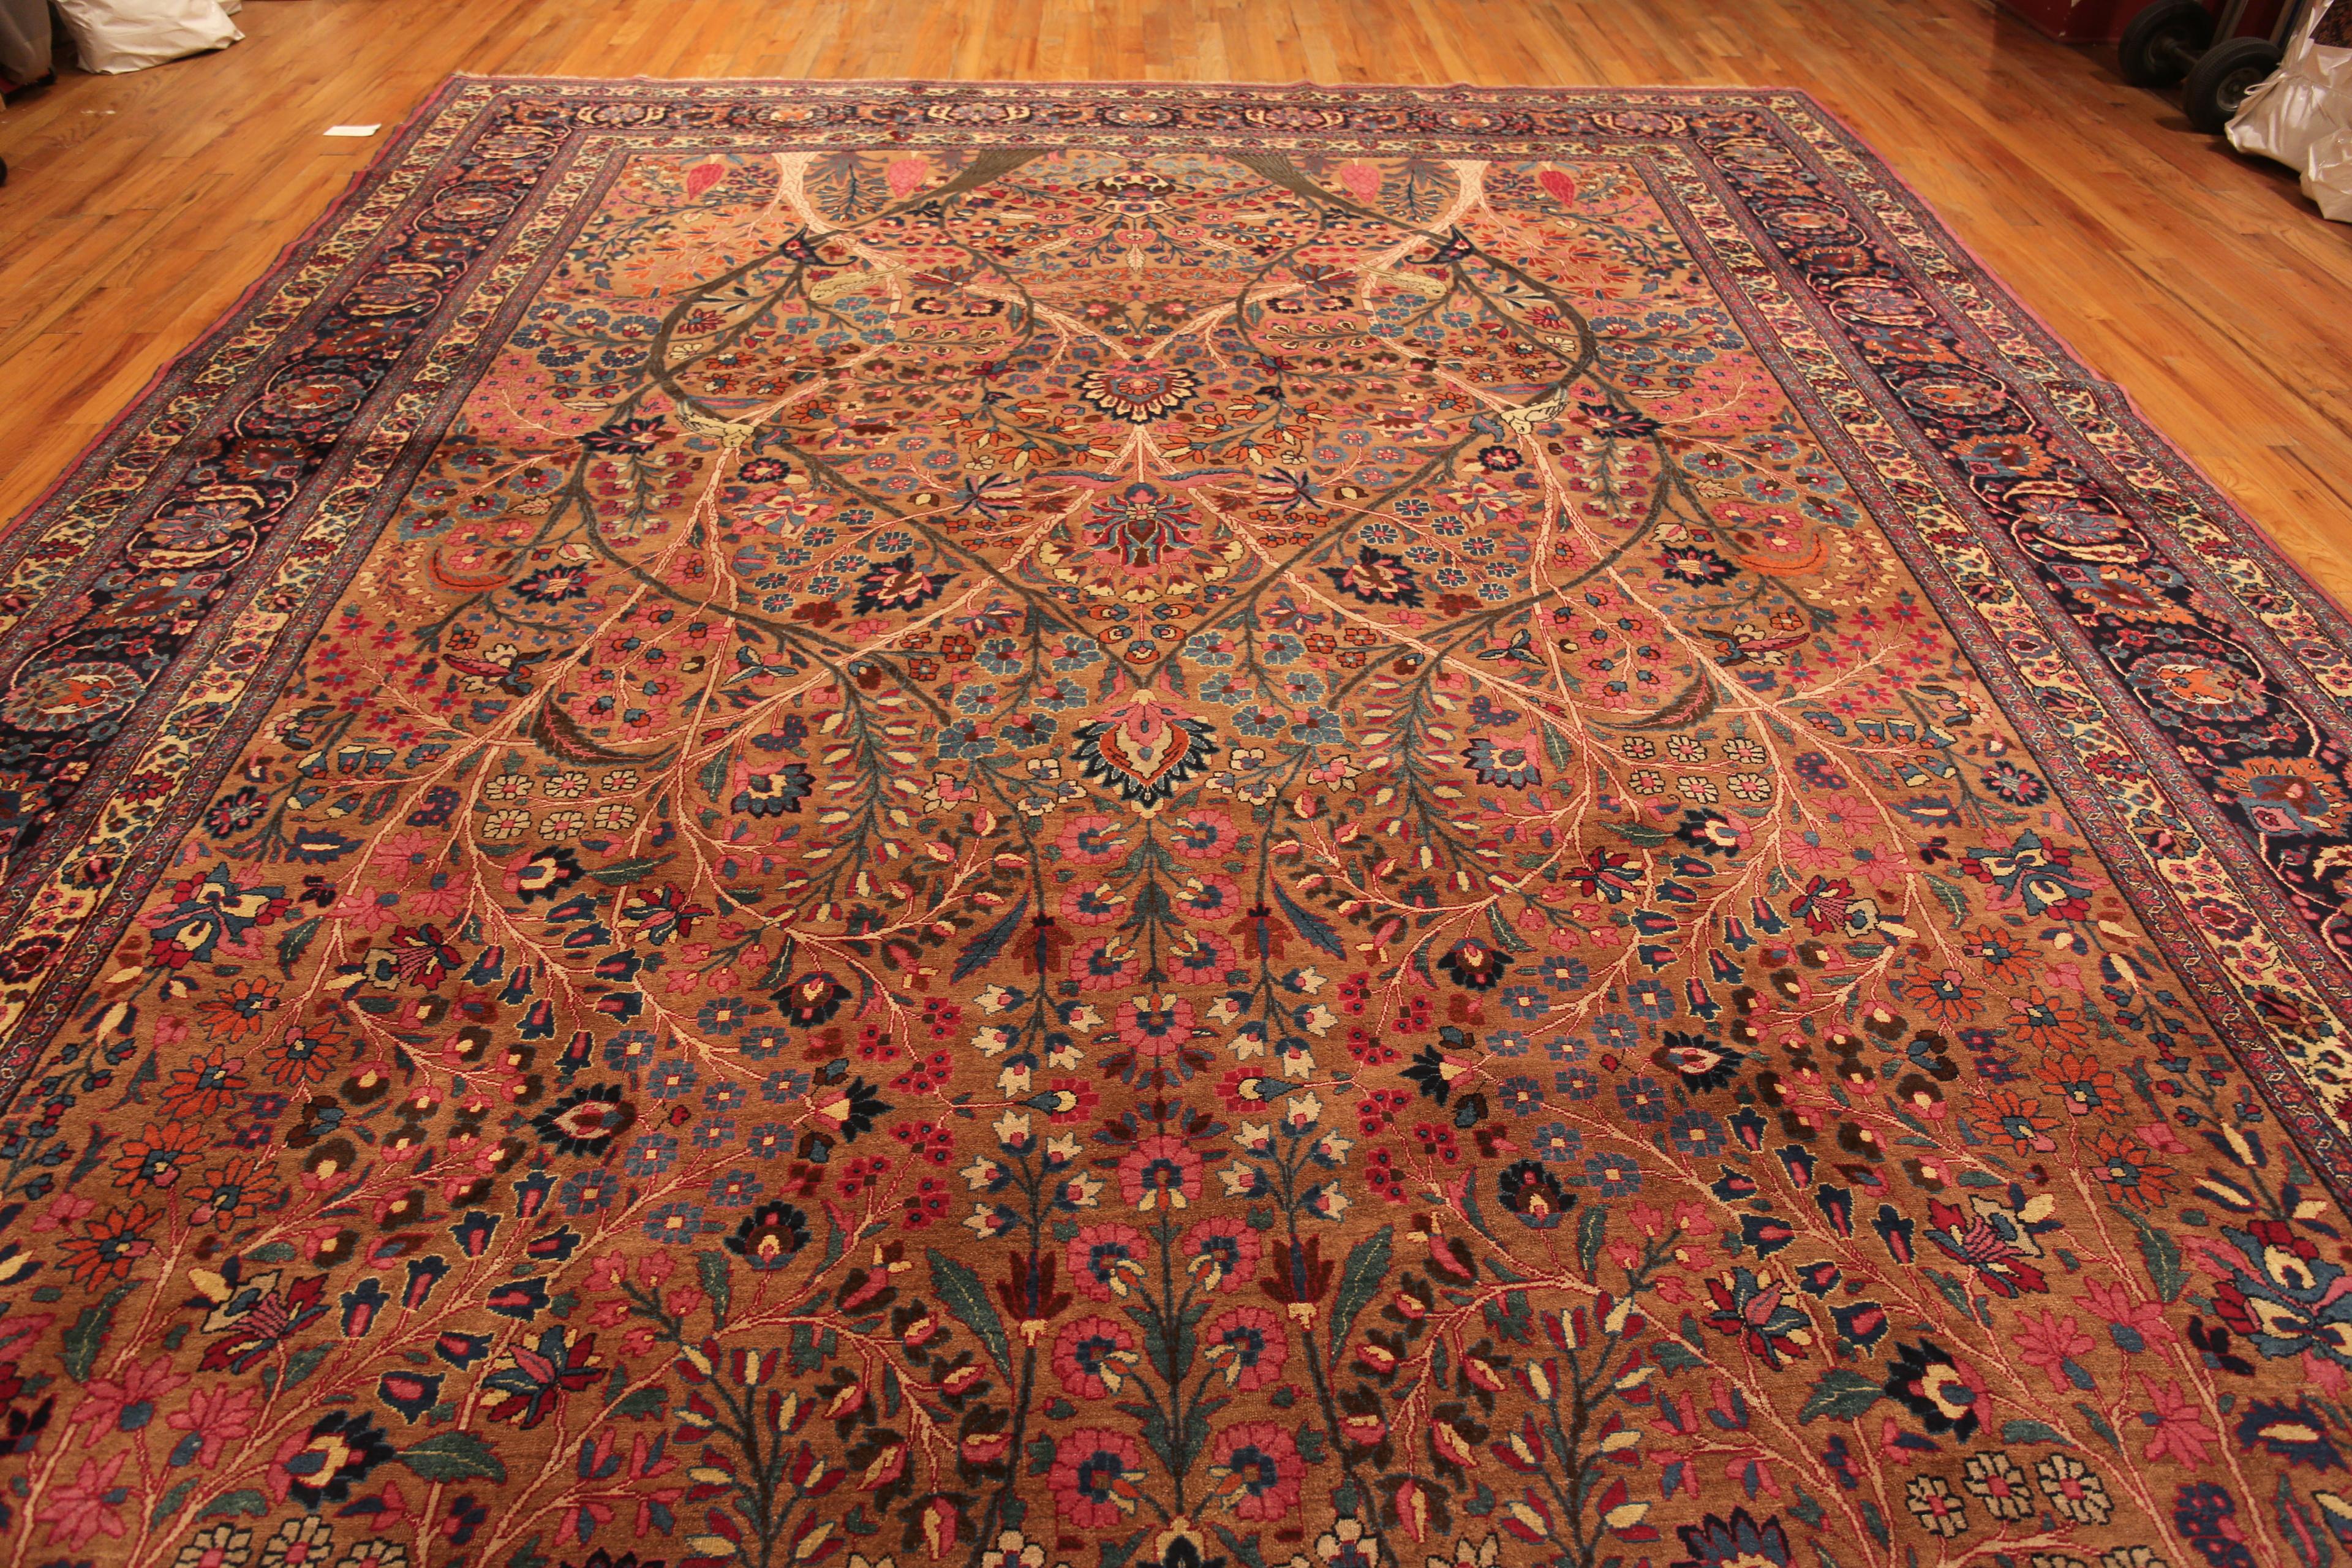 Fine Floral Tree Of Life Oversized Antique Persian Vase Design Khorassan Garden Rug, Country of origin: Persia, Circa date: 1920. Size: 12 ft 10 in x 24 ft 9 in (3.91 m x 7.54 m)

